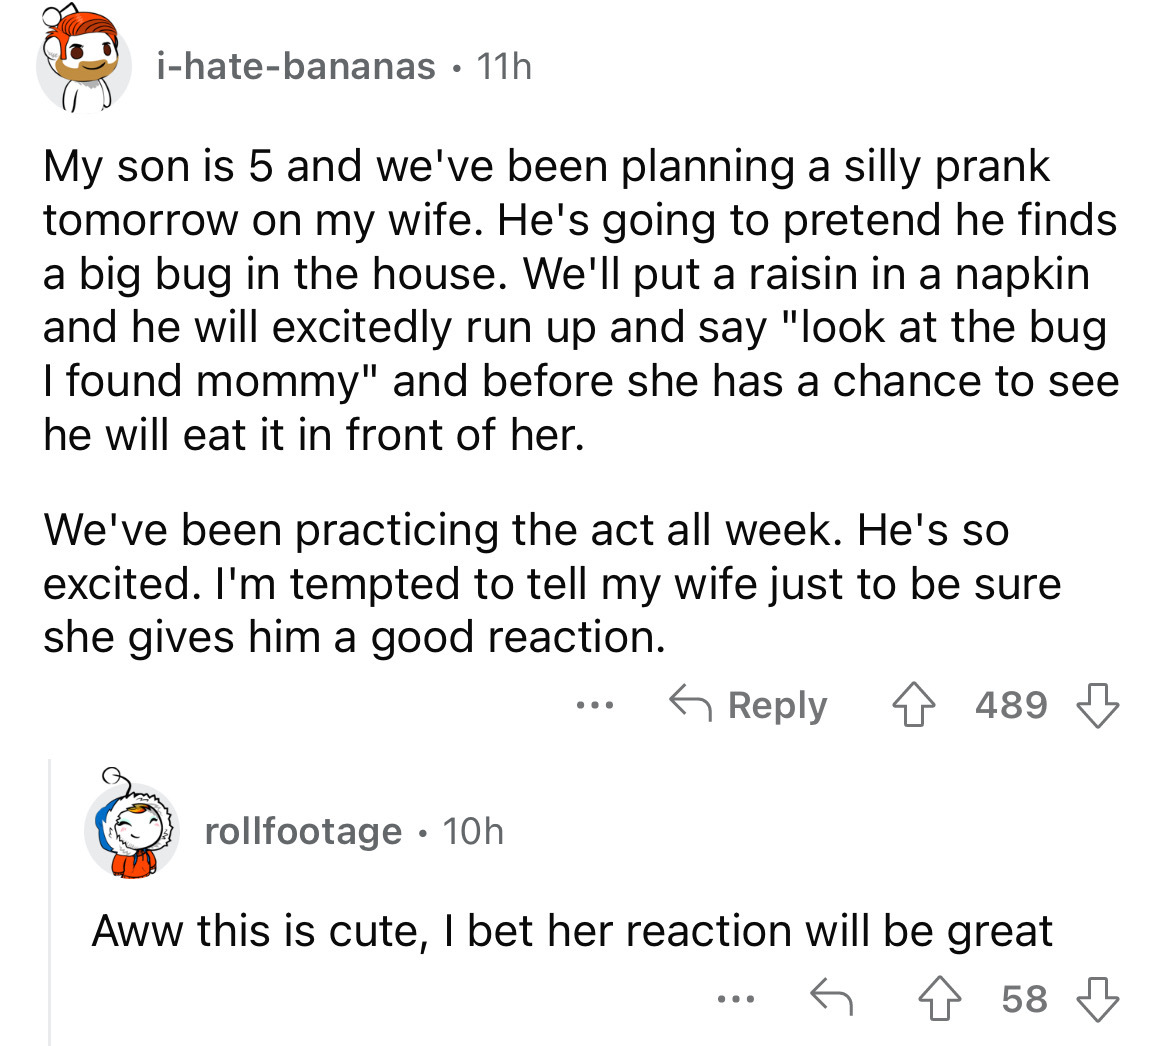 screenshot - ihatebananas 11h My son is 5 and we've been planning a silly prank tomorrow on my wife. He's going to pretend he finds a big bug in the house. We'll put a raisin in a napkin and he will excitedly run up and say "look at the bug I found mommy"